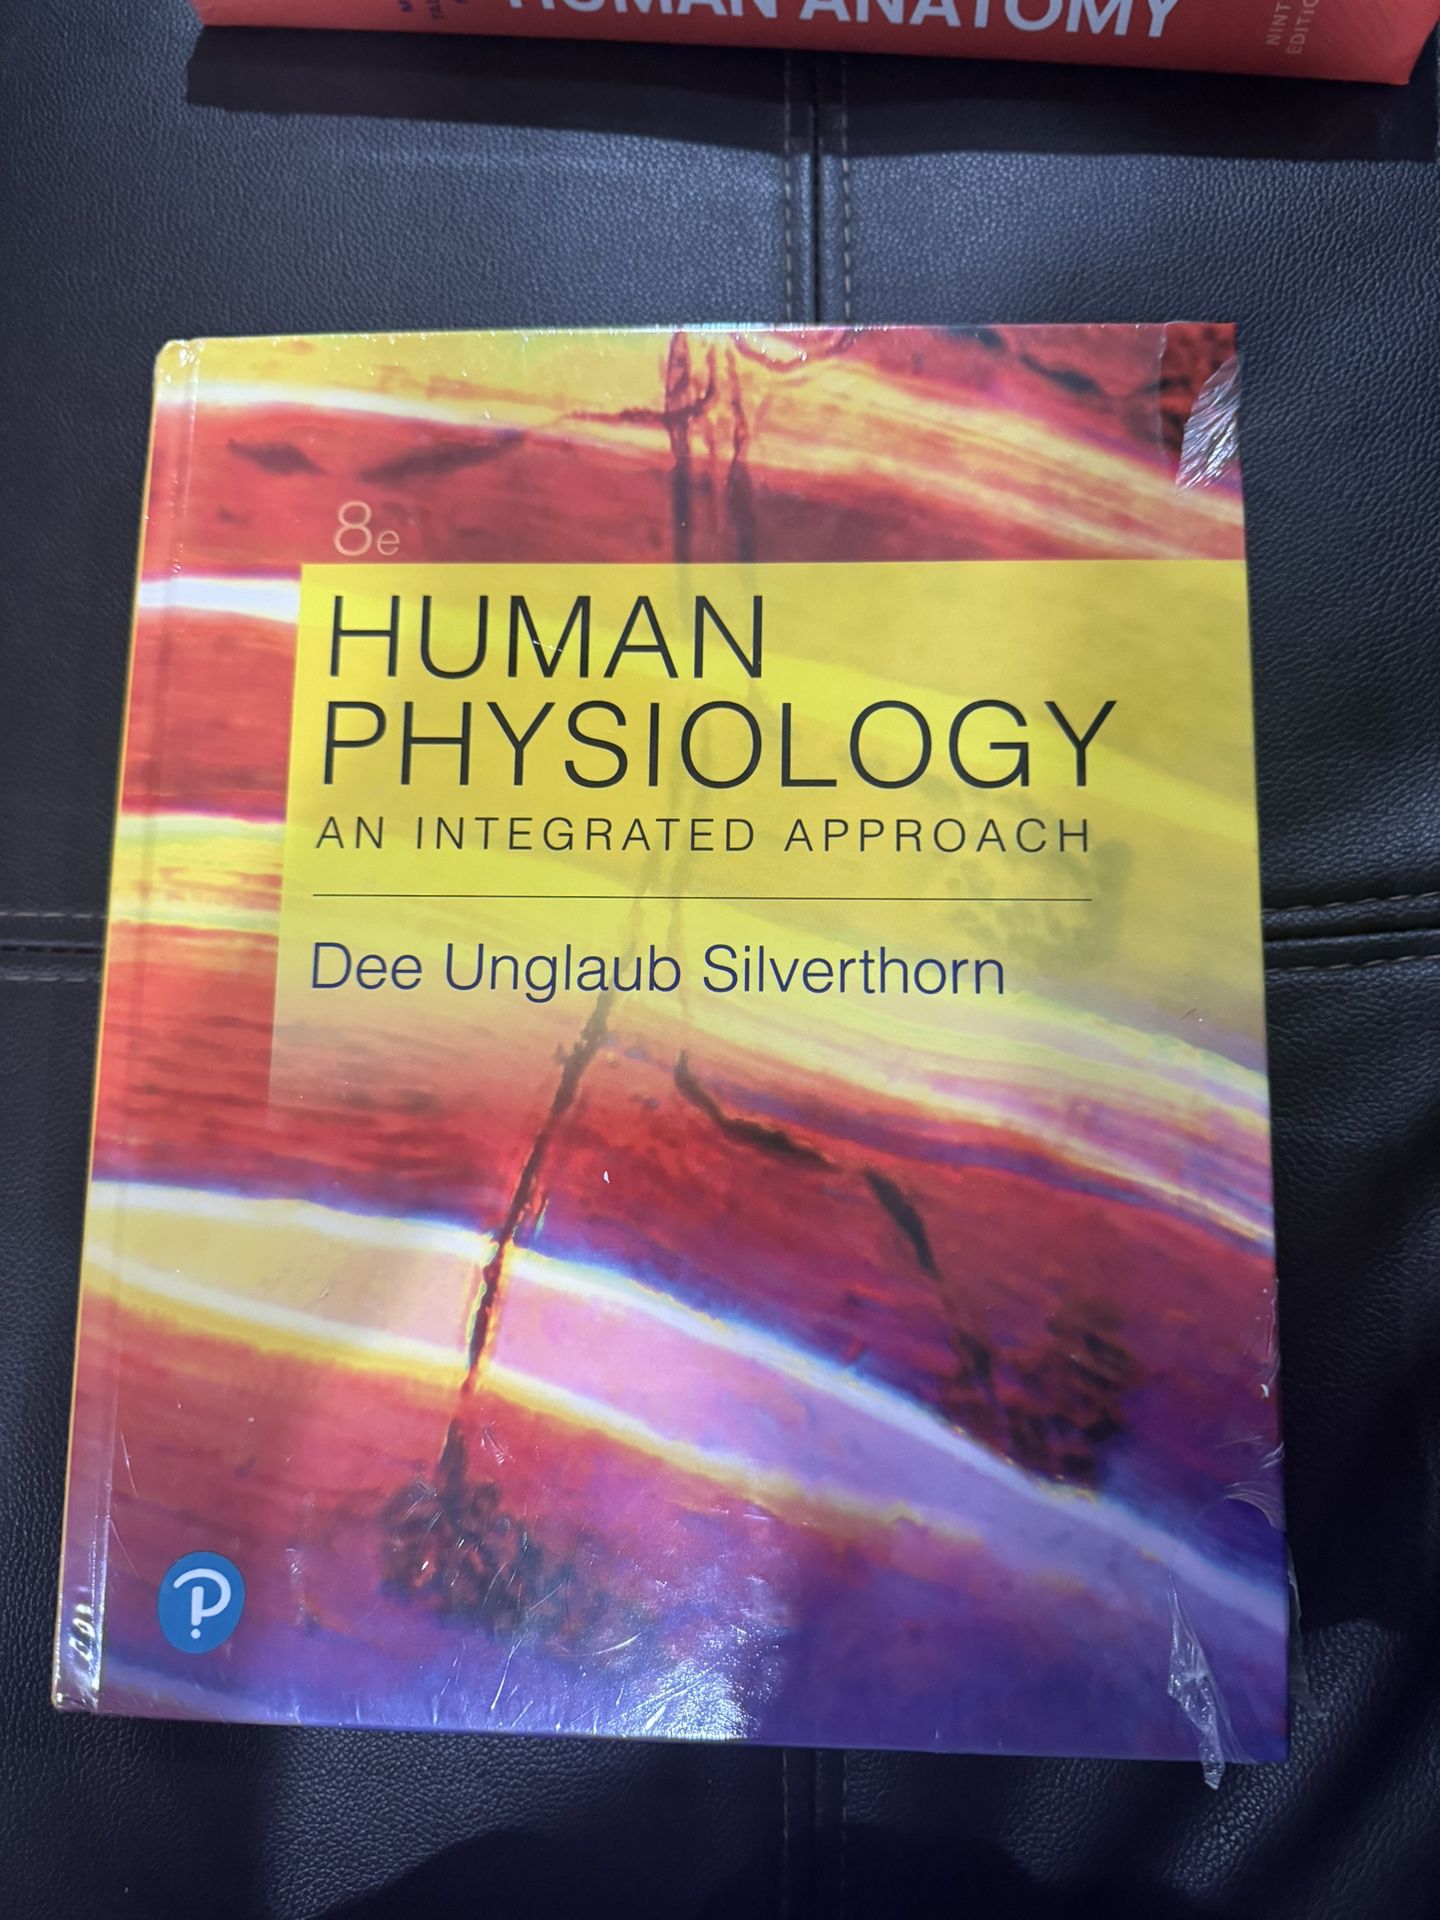 Human Physiology College Level Textbook